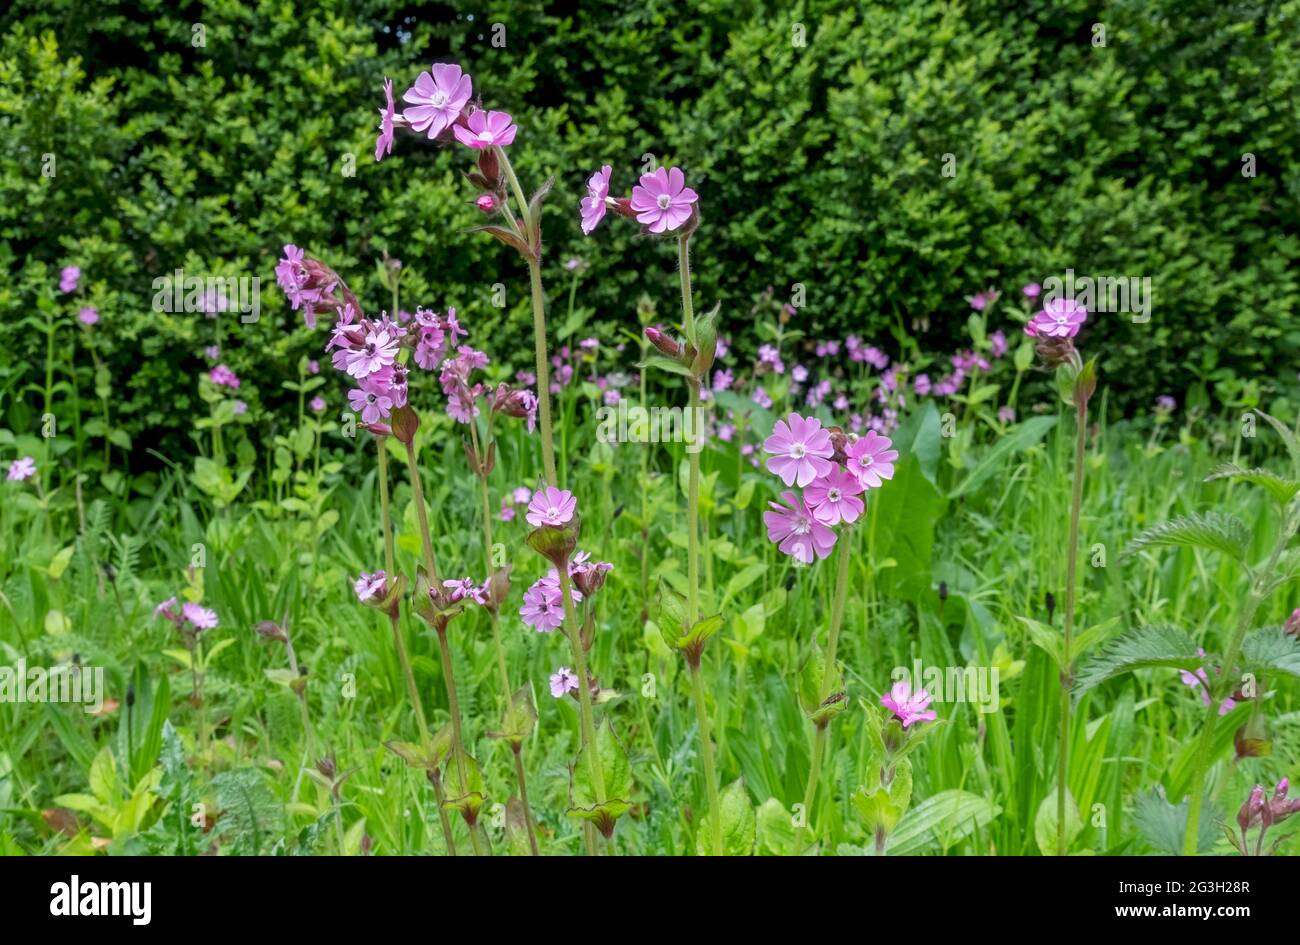 Close up of red campion wild flower wildflowerwildflowers flowers flowering growing in spring England UK United Kingdom GB Great Britain Stock Photo